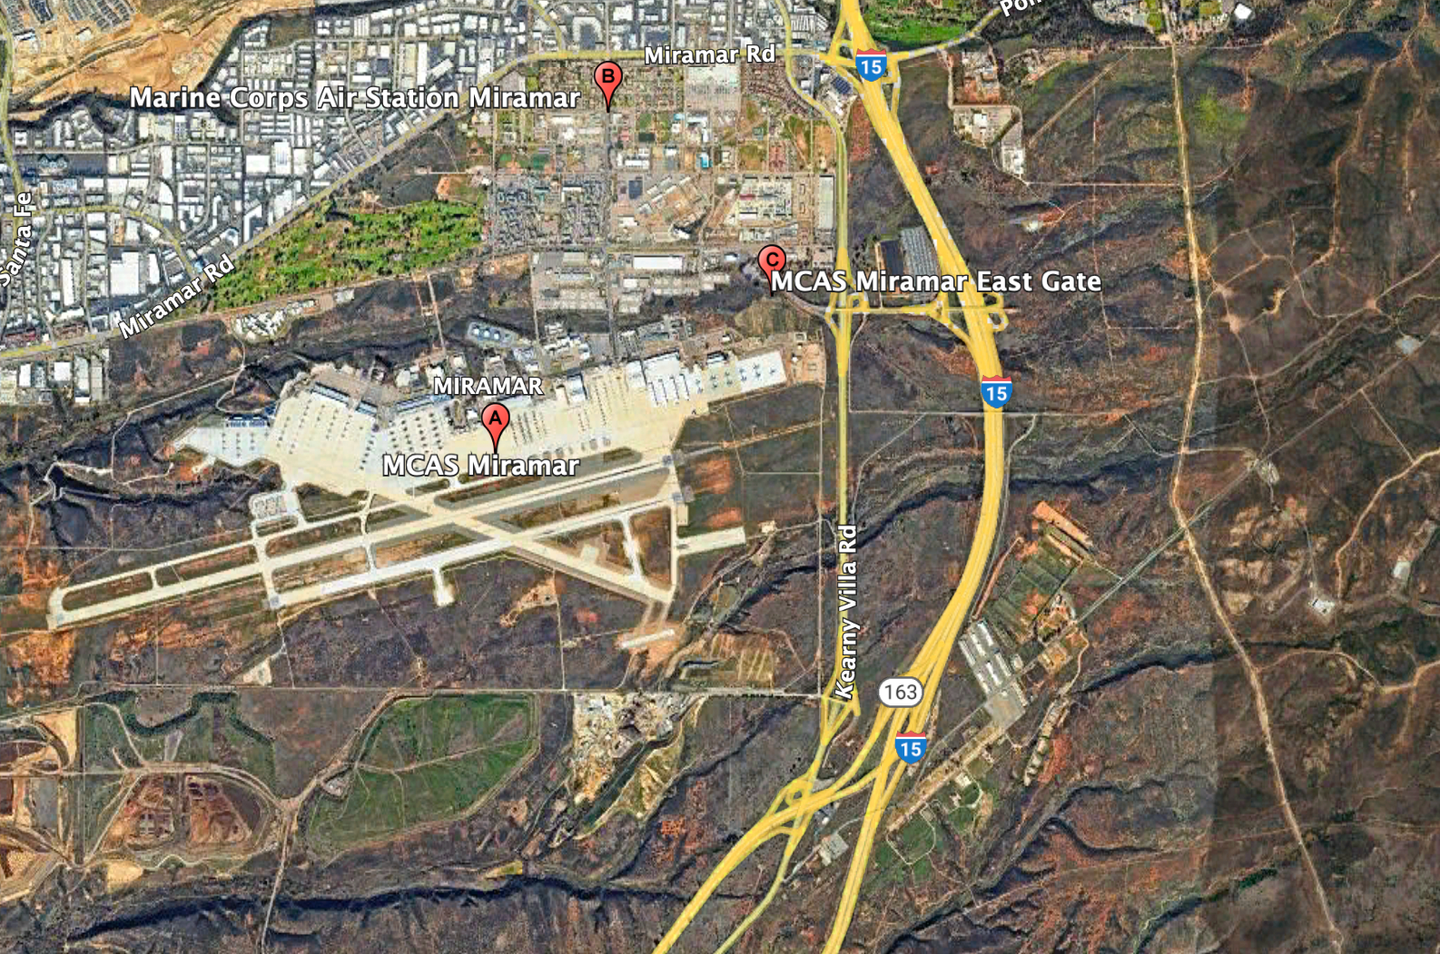 A satellite view of MCAS Miramar, with the I-15 highway located east of the base. <em>Google Earth</em>